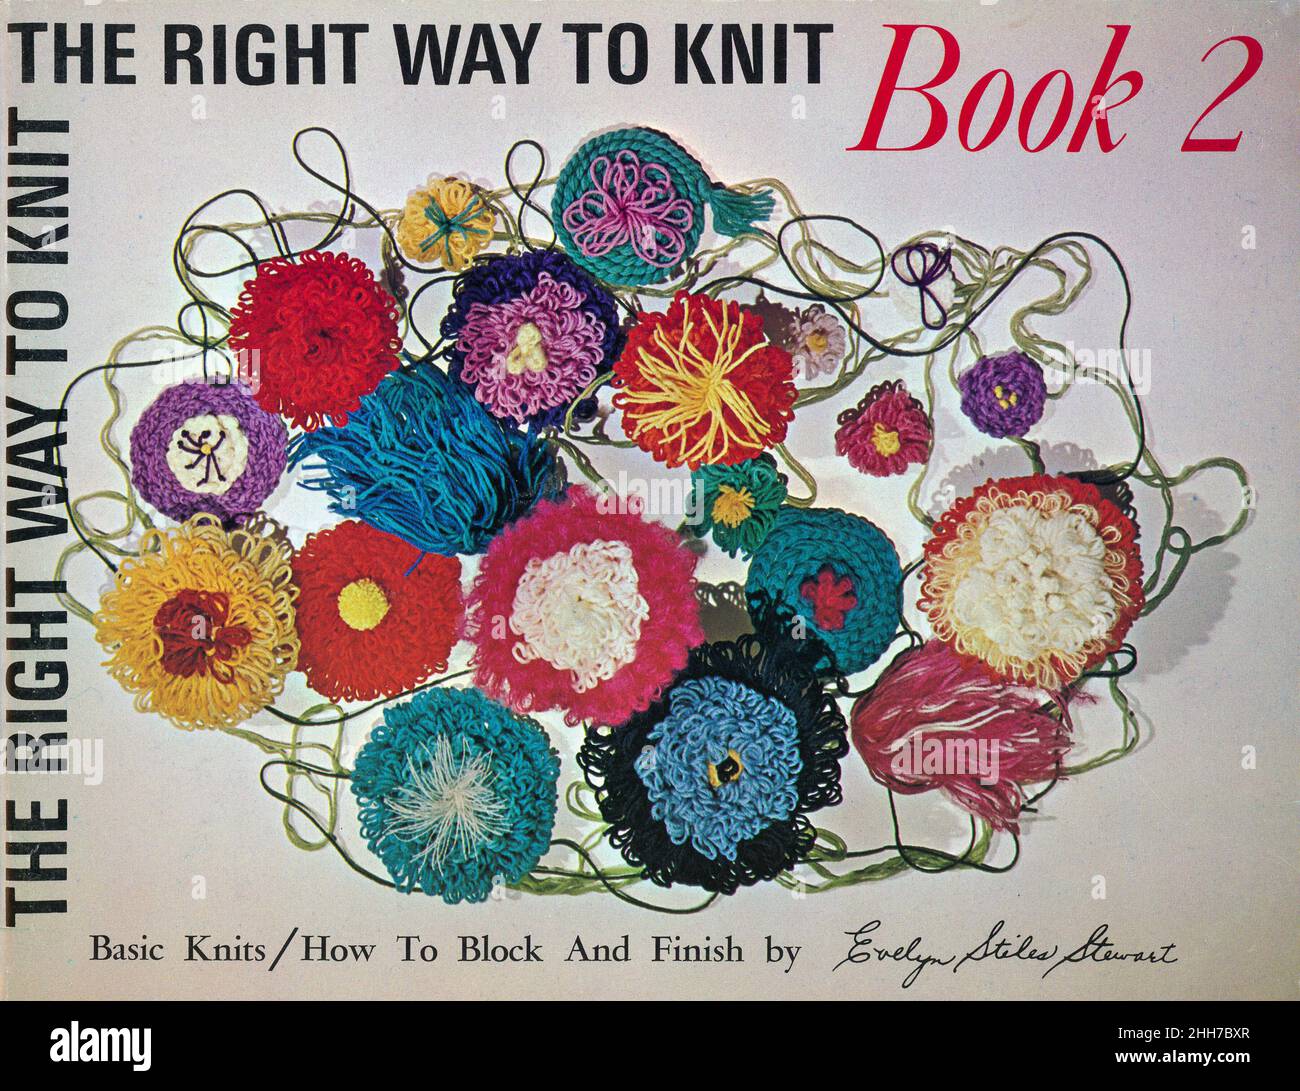 Vintage 'The Right Way to Knit' instruction book, USA  1969 Stock Photo